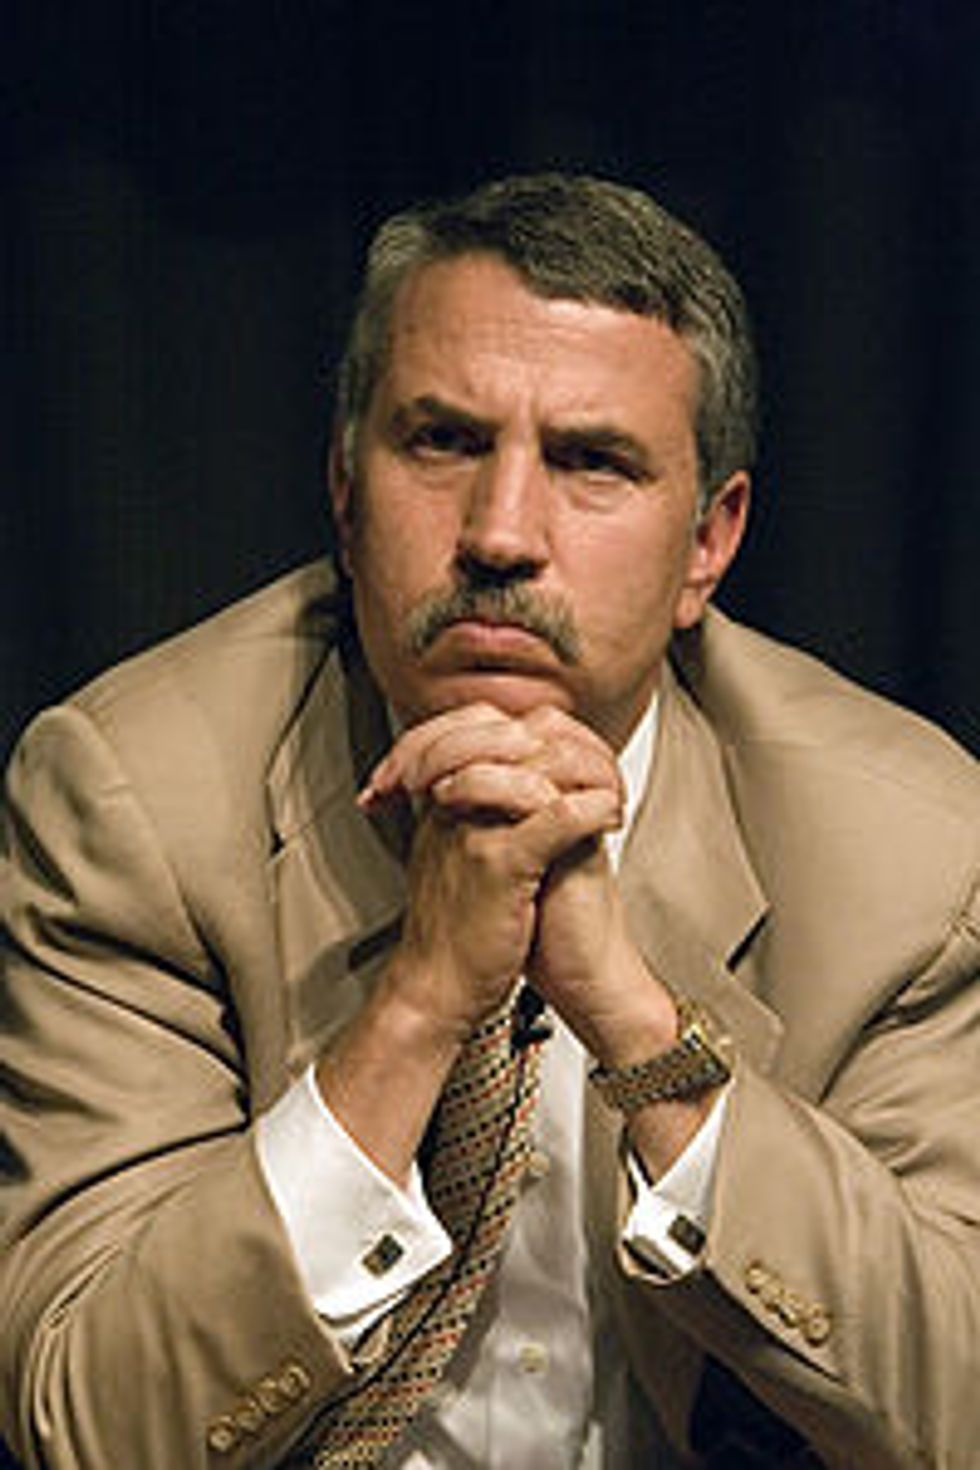 Tom Friedman Bravely Calls For 'Conservative' Party To Basically Do Everything Obama's Done